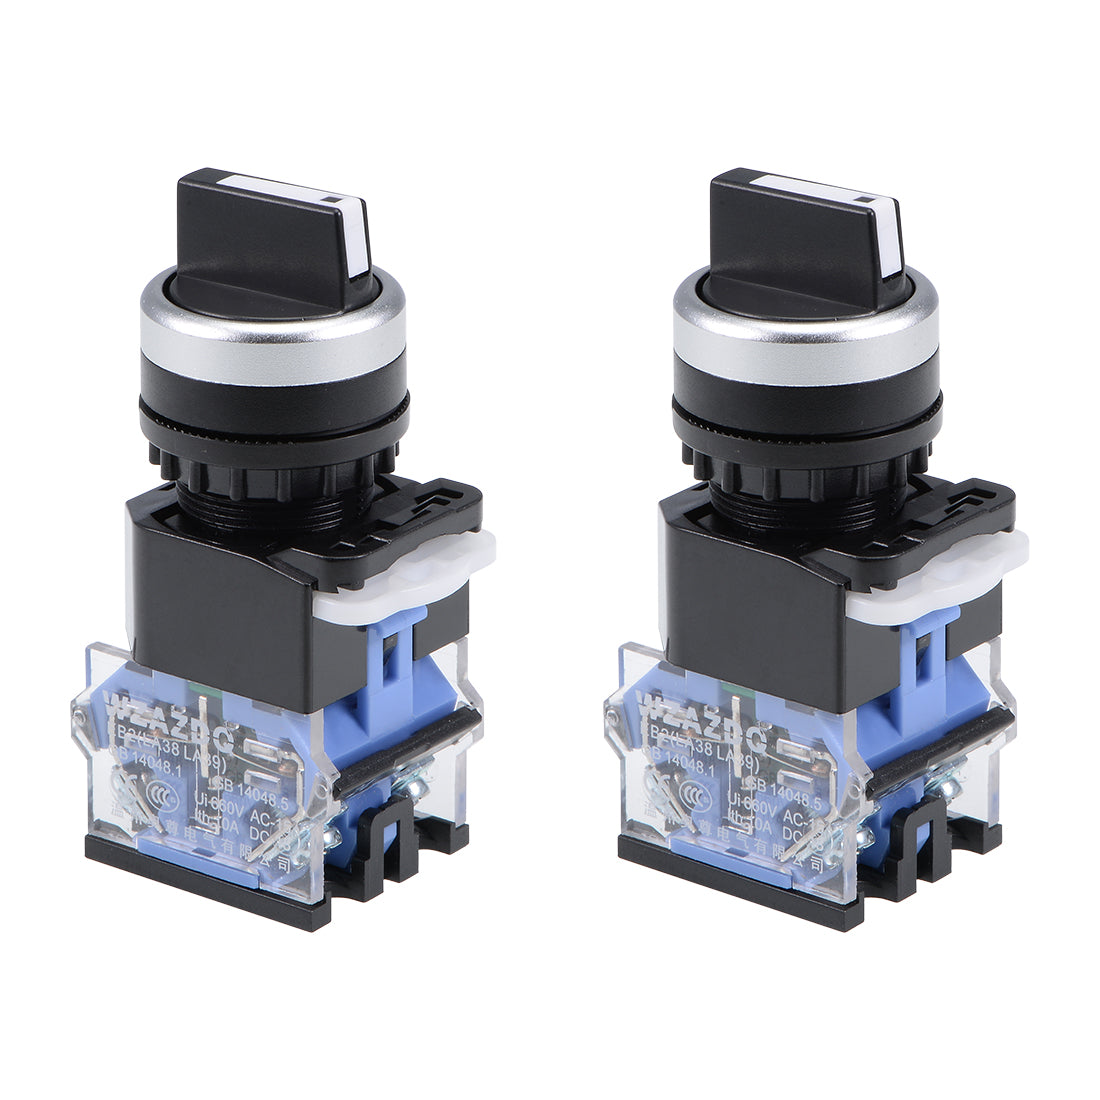 uxcell Uxcell Rotary Selector Switch 2 Positions 2NO Momentary AC 660V 10A 22mm Panel Mount 2pcs